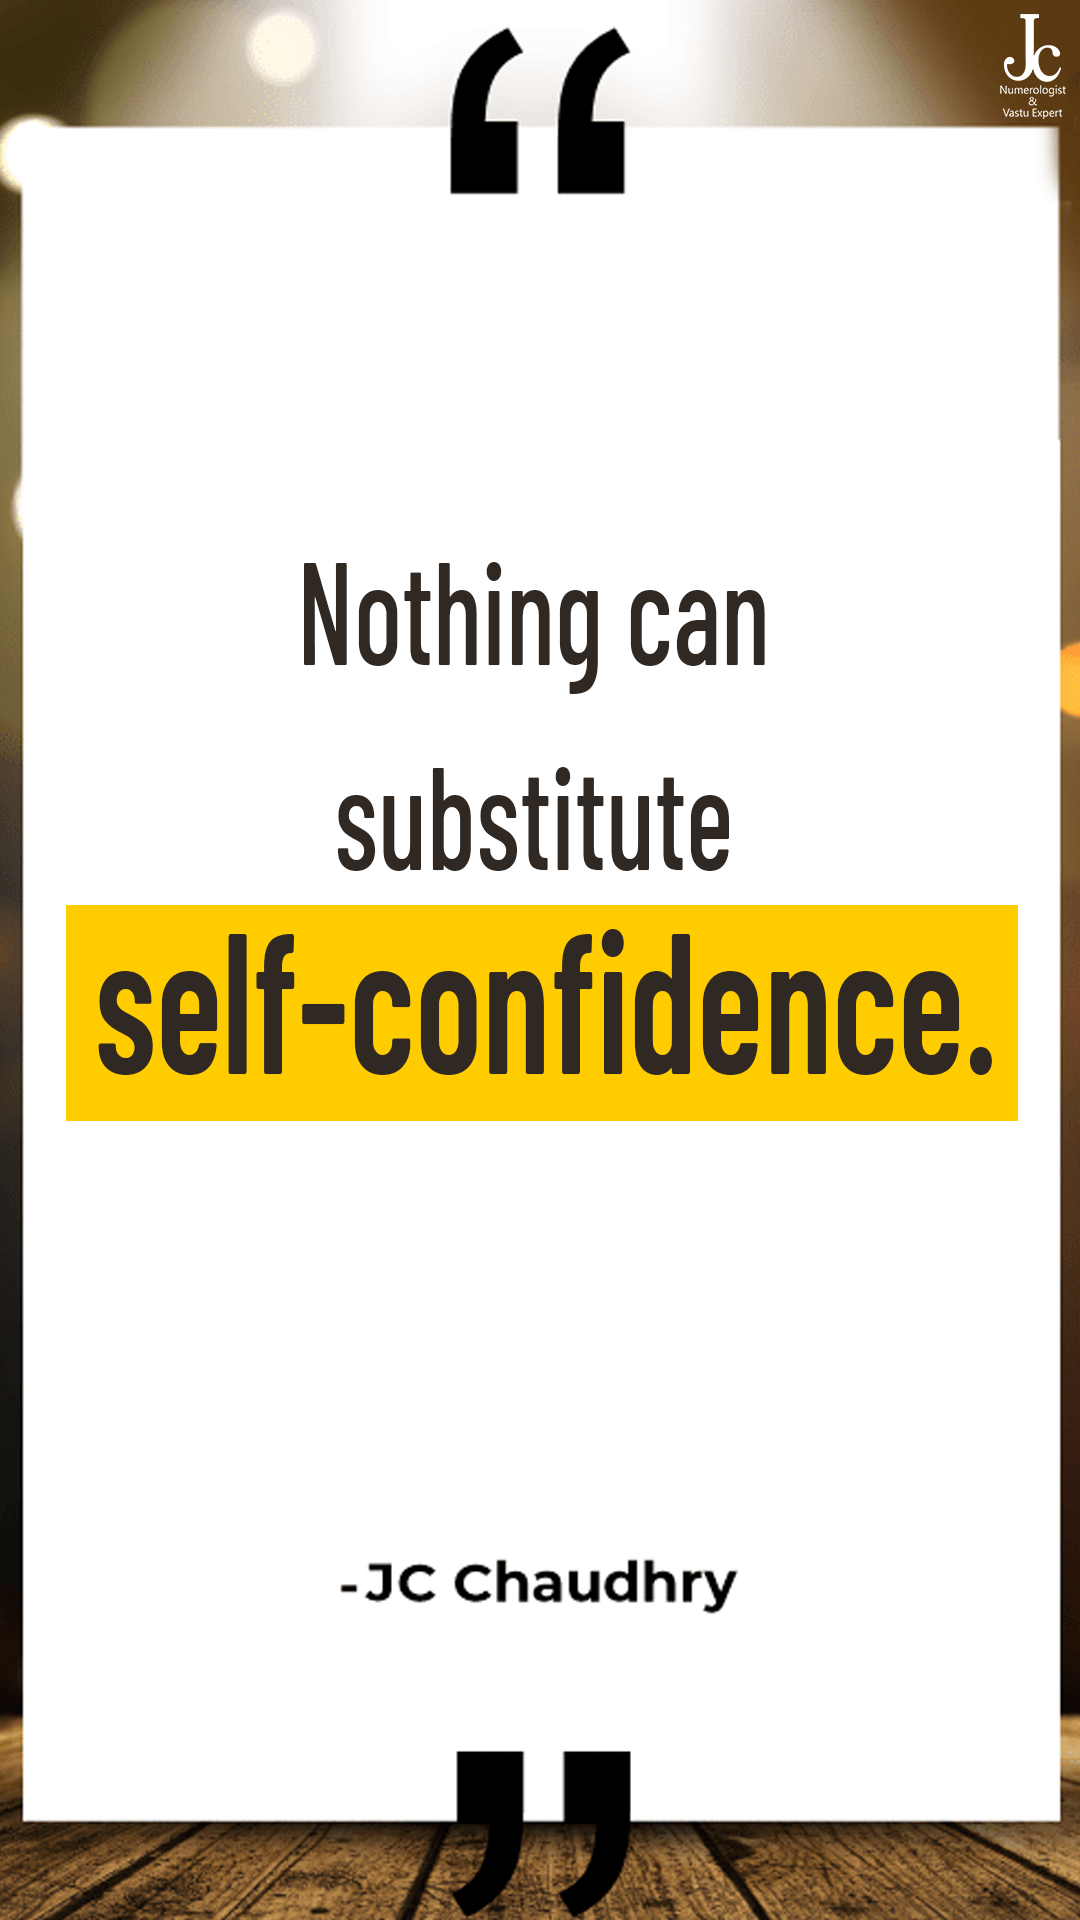 Nothing can substitute self-confidence.